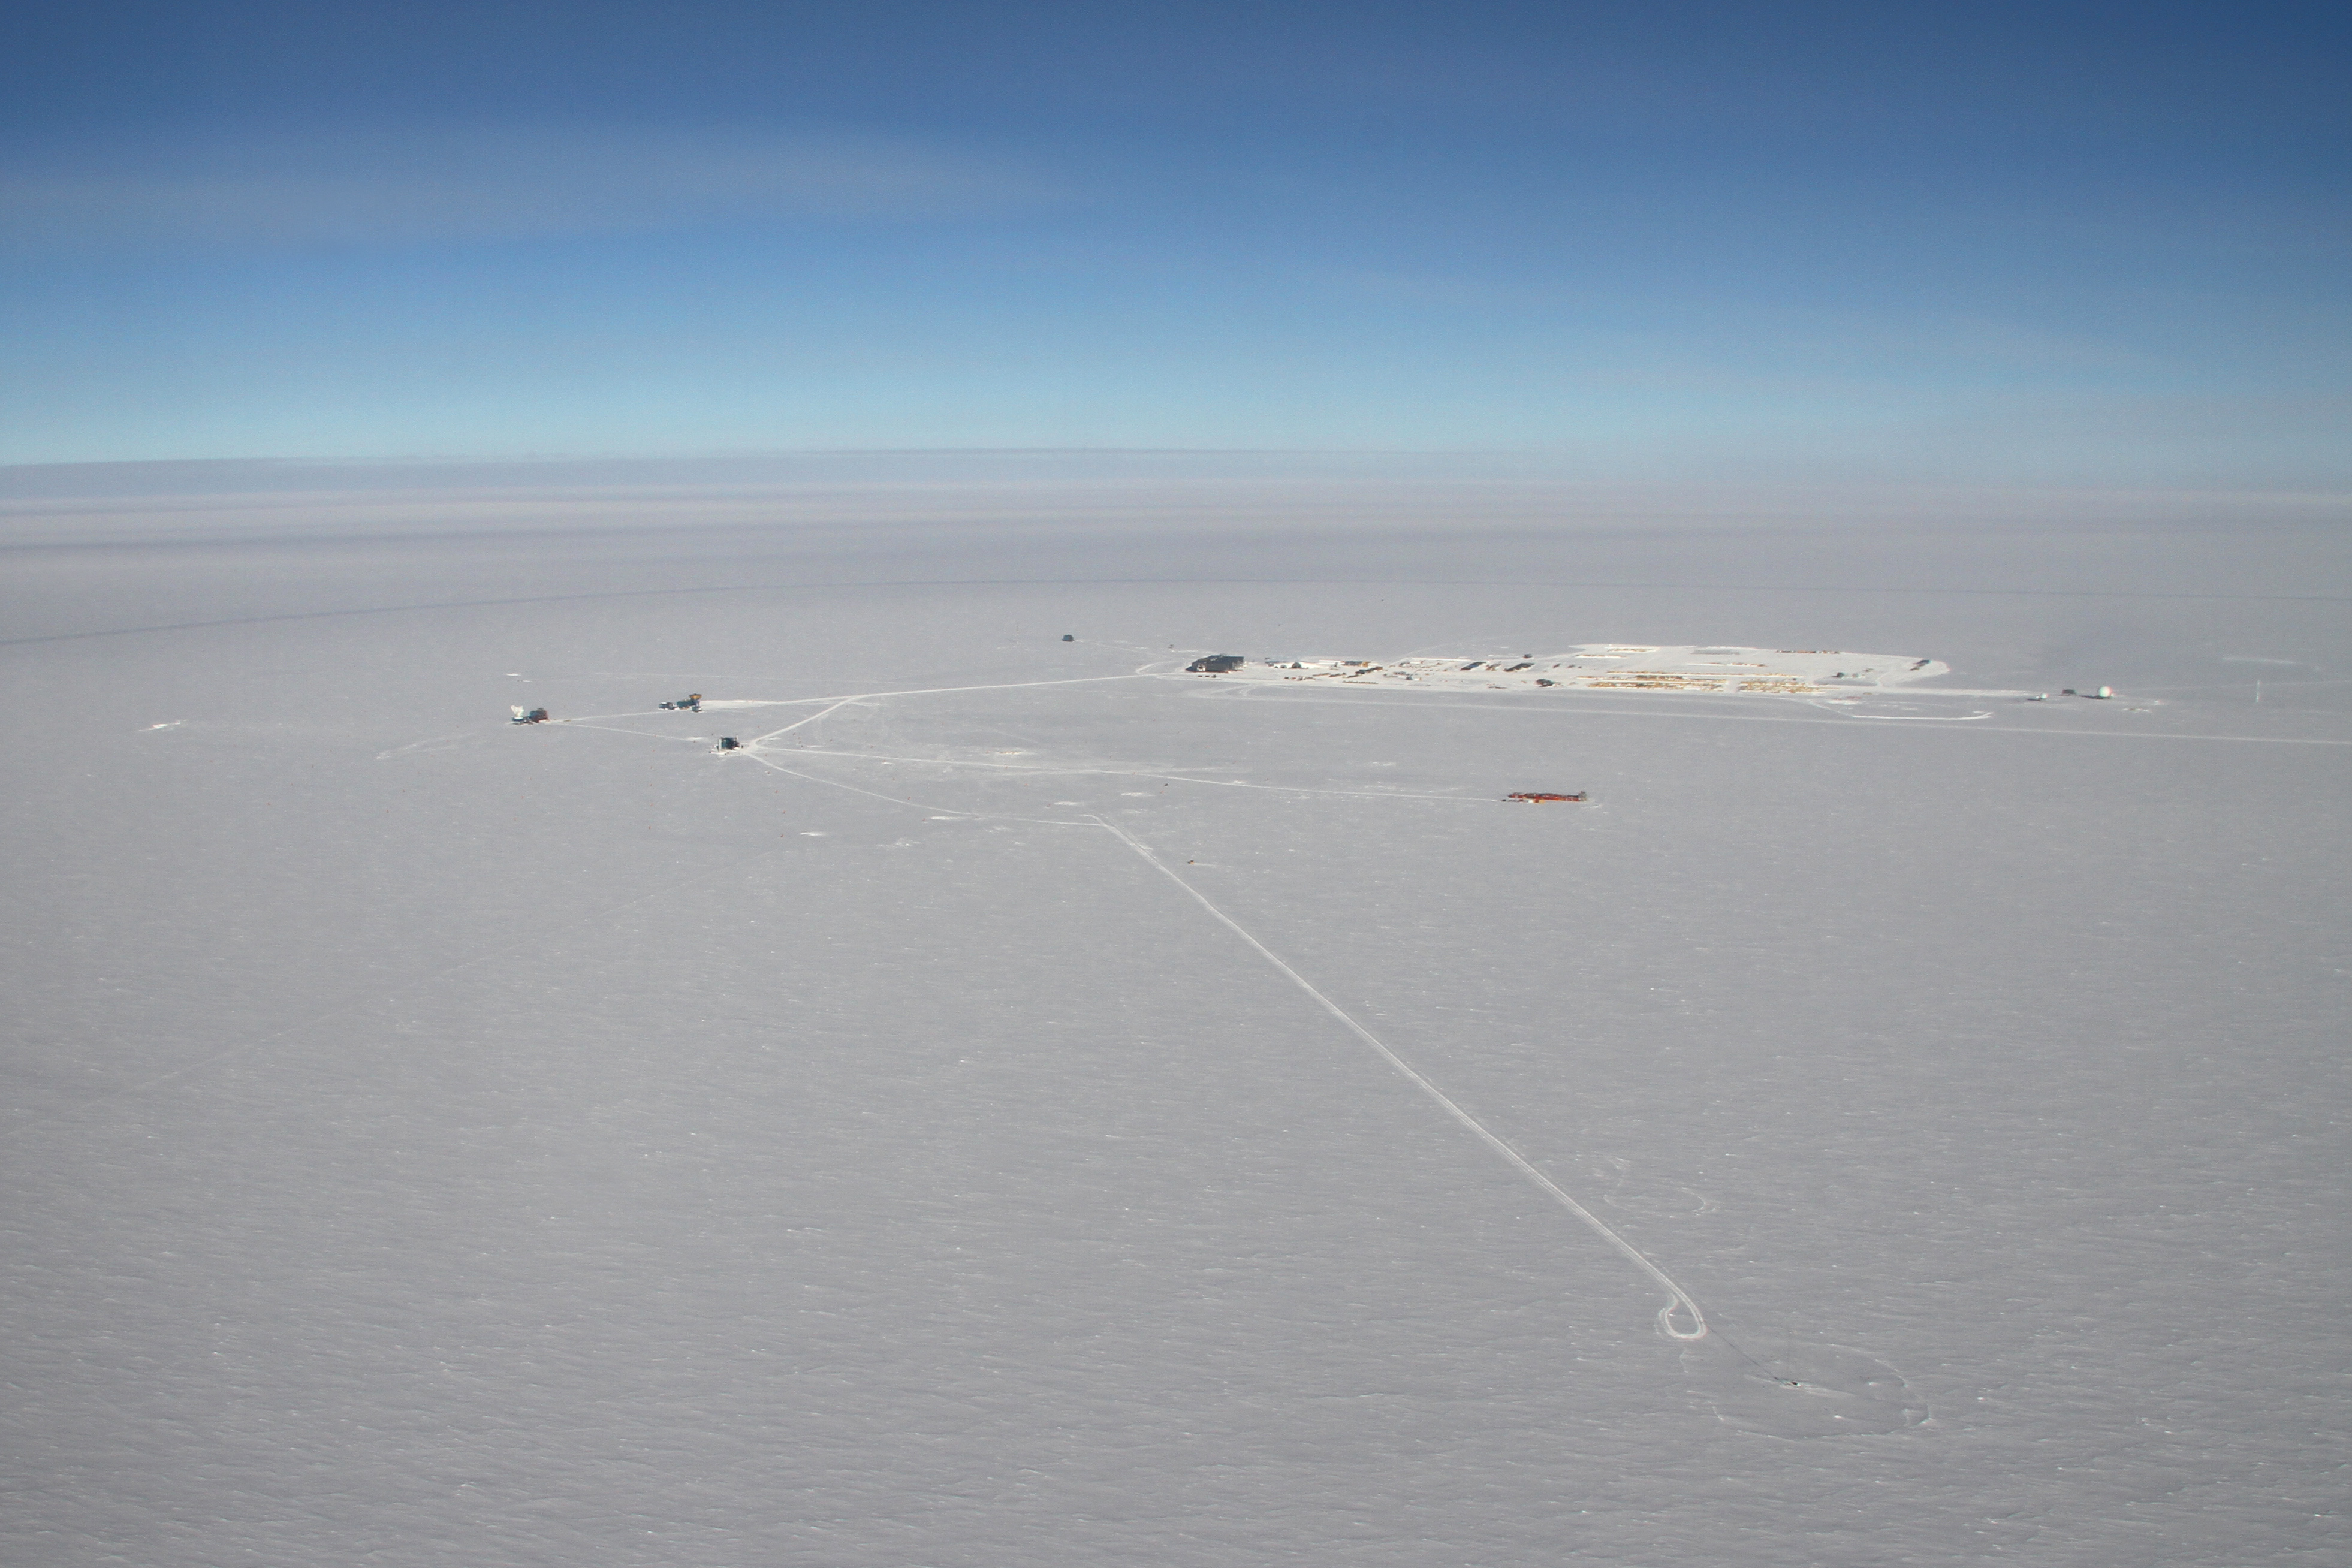 Aerial photo of buildings on snow.